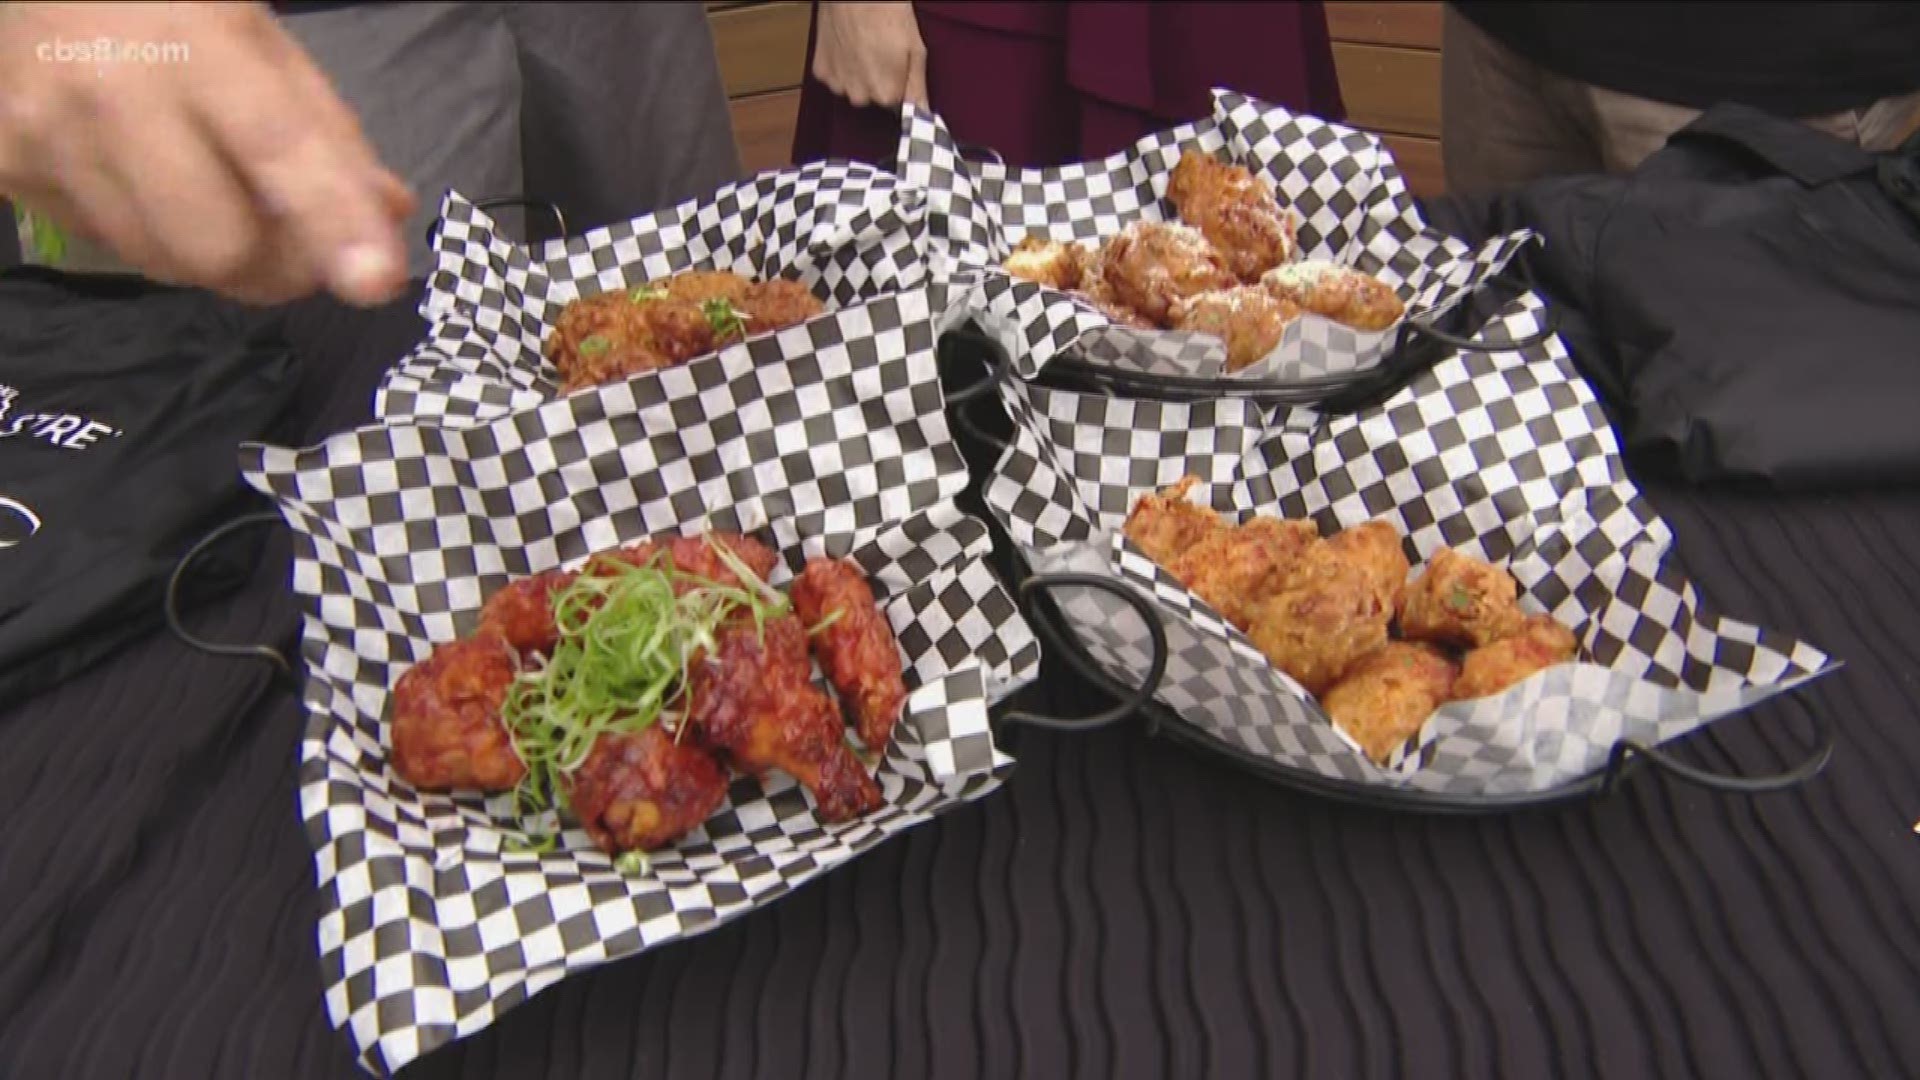 Chow down on 25 separate flavors of wings during the wing eating competition.